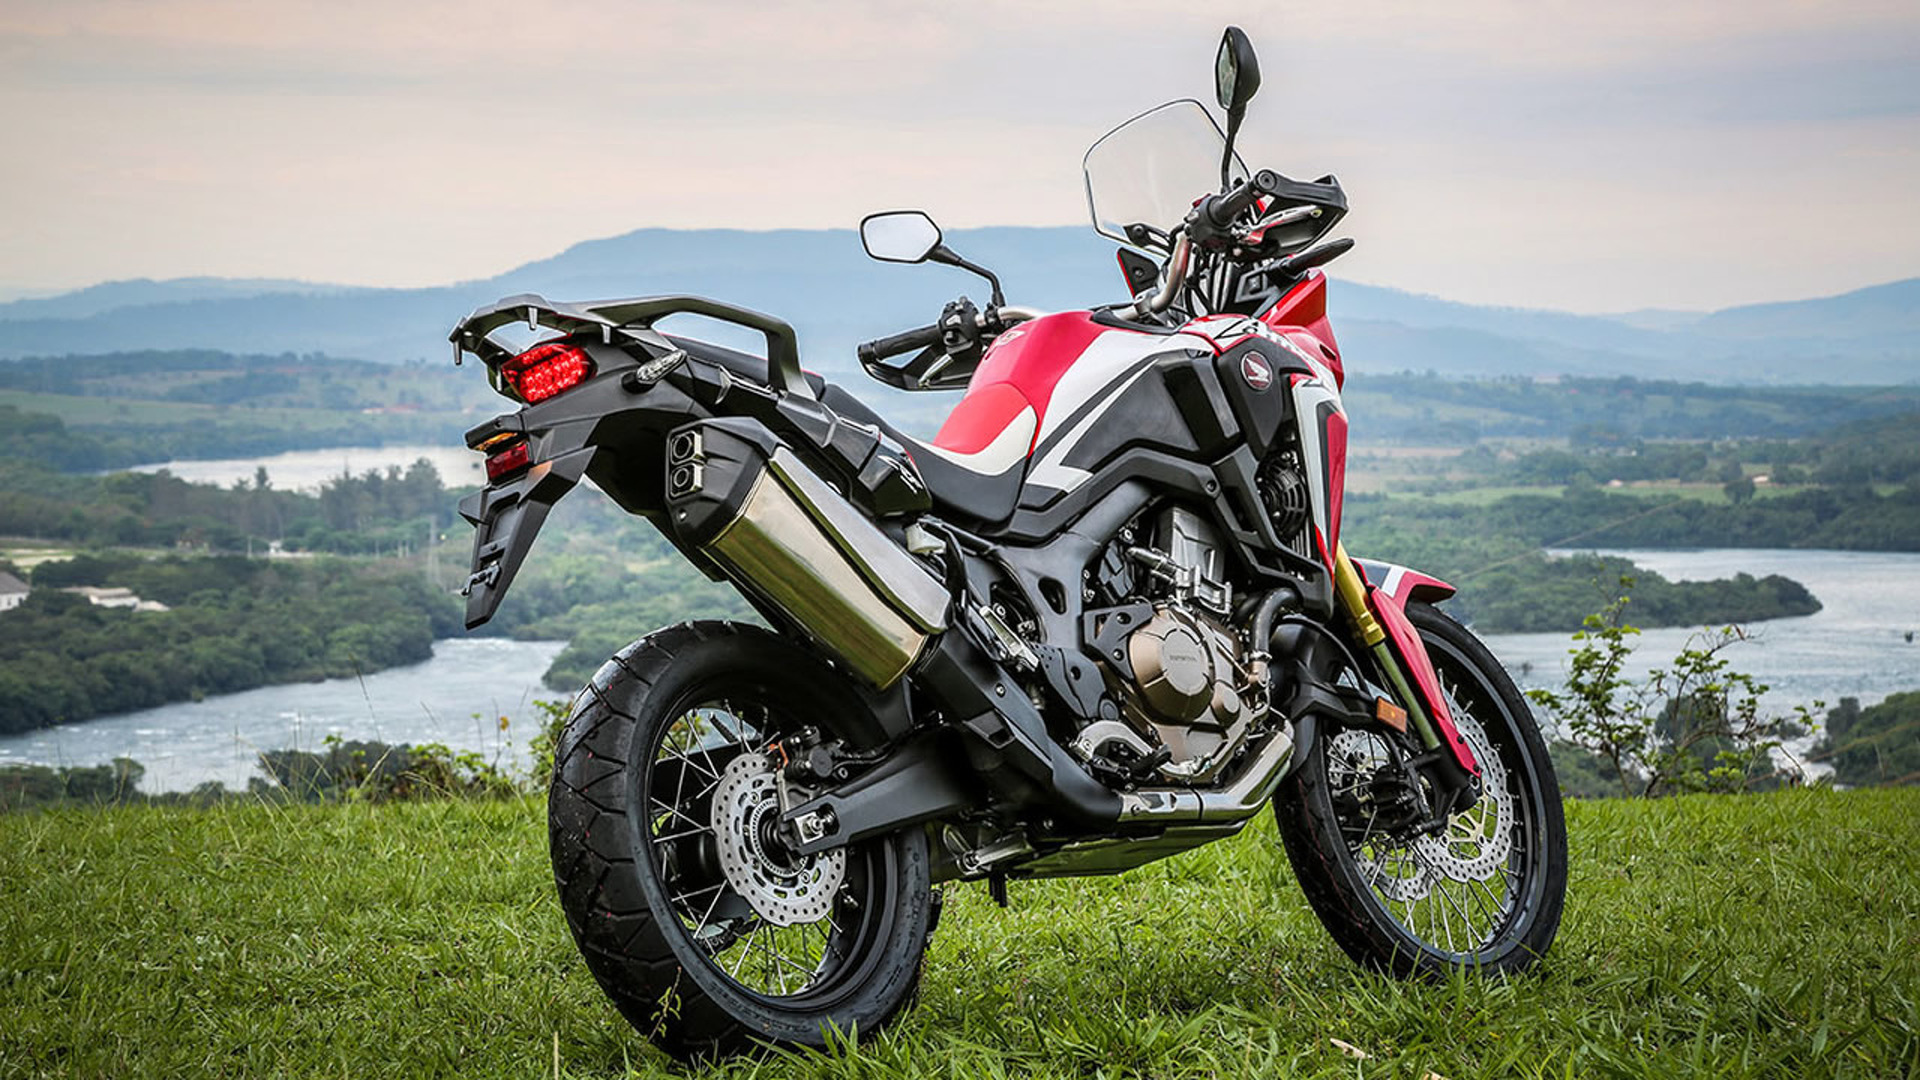 Honda crf1000l africa twin: review, history, specs - bikeswiki.com, japanese motorcycle encyclopedia